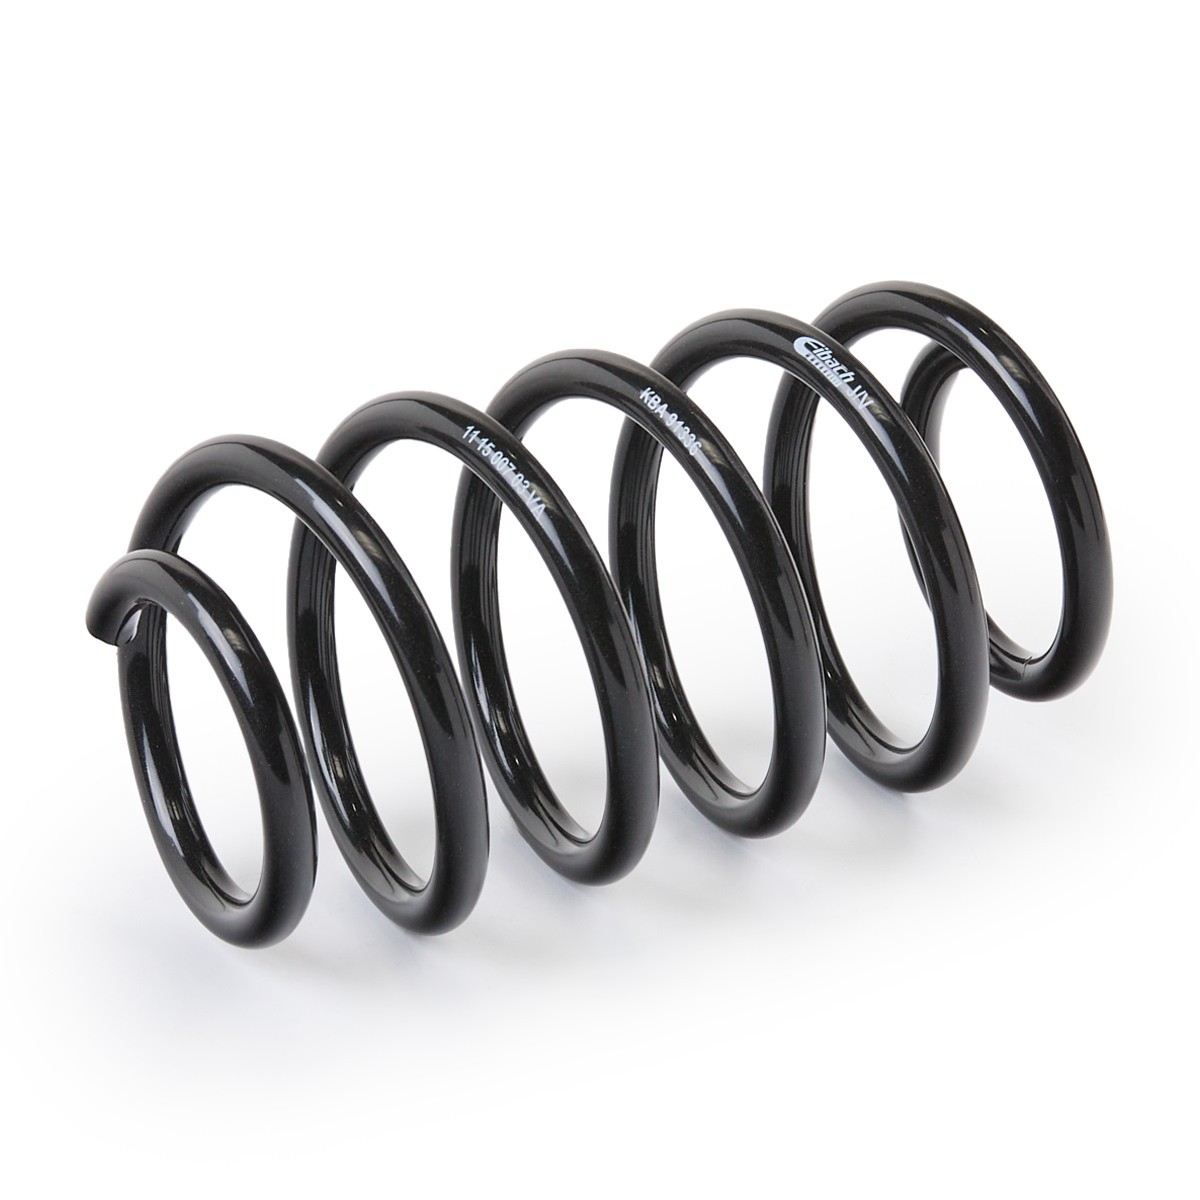 EIBACH Single Spring Pro-Kit F11-15-007-03-VA Coil spring Front Axle, Coil Spring, for vehicles with sports suspension